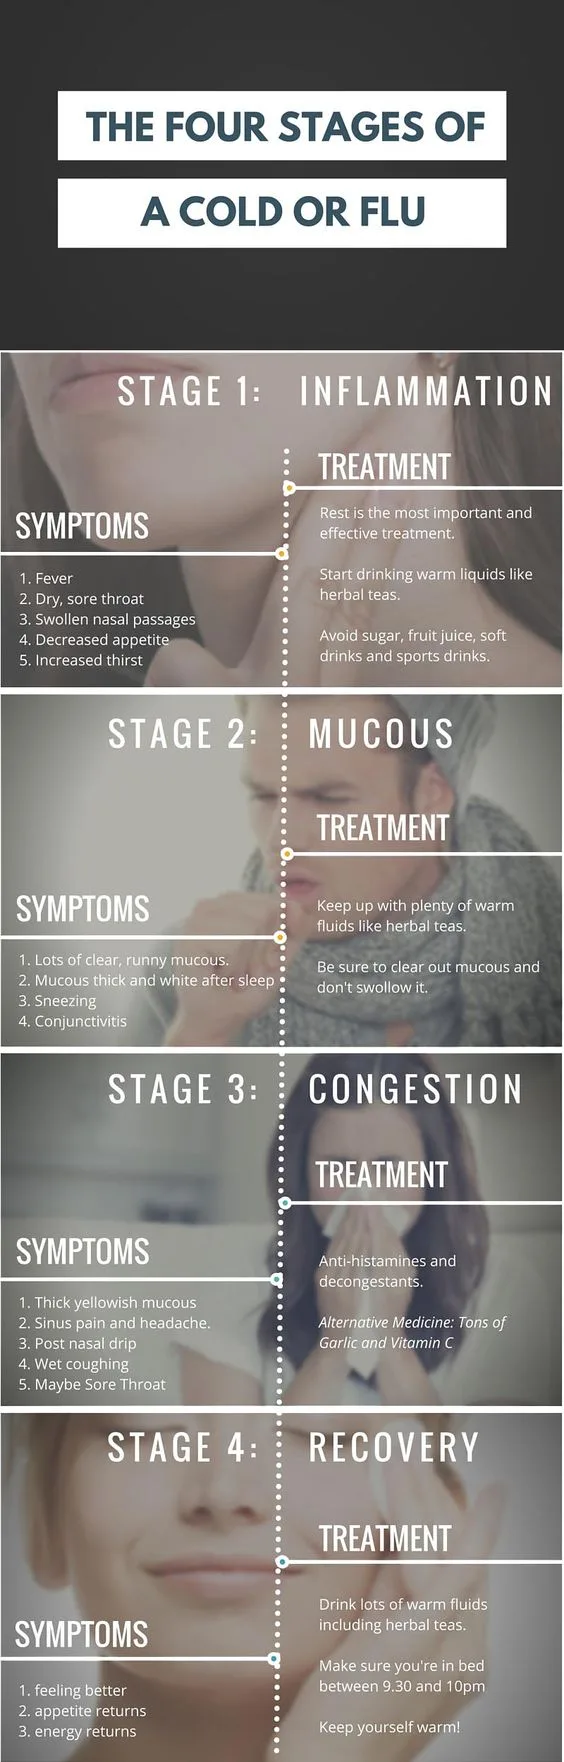 the stages of a flu or cold